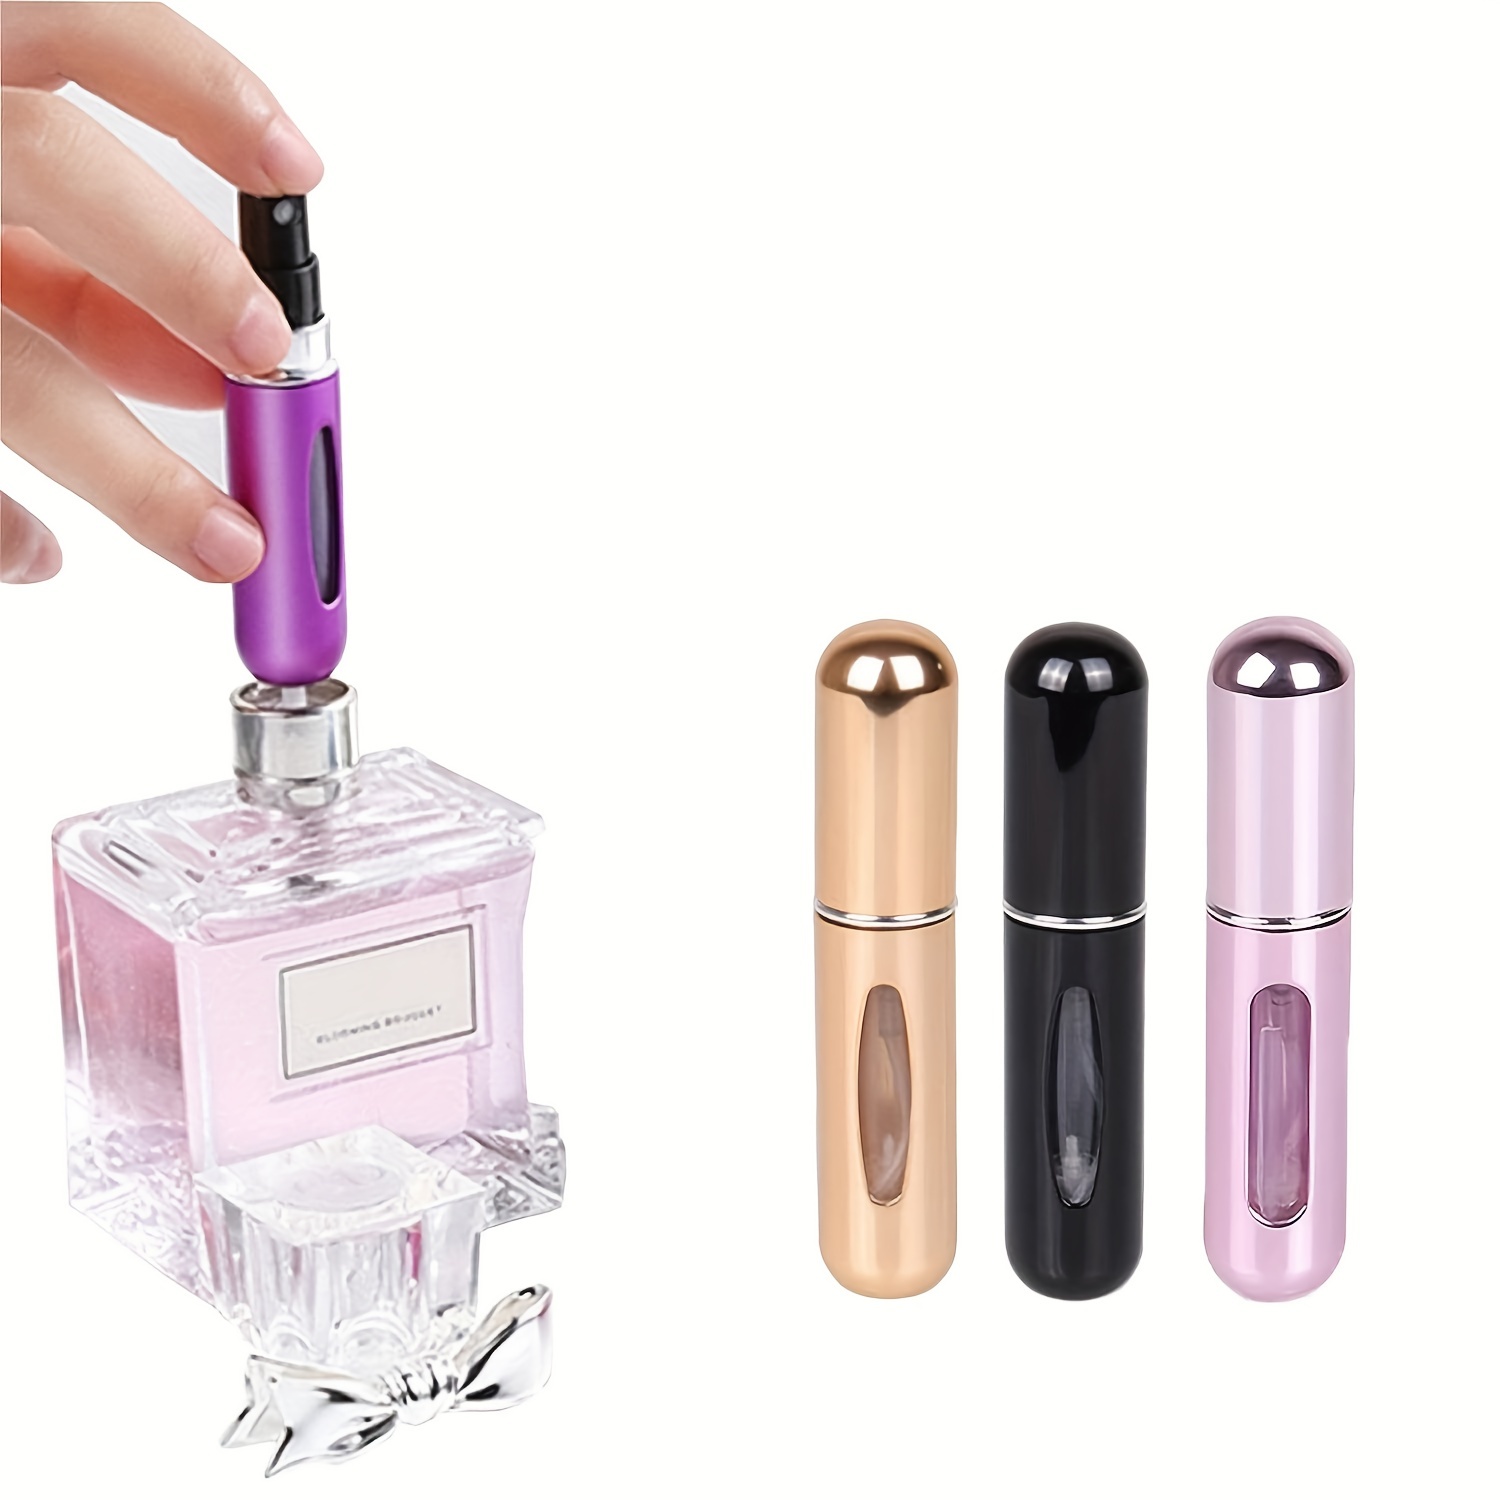 Travel Mini perfume Refillable Atomizer Container, Portable , Travel Size ,  Scent Pump Case, Fragrance Empty spray bottle for Traveling and Outgoing